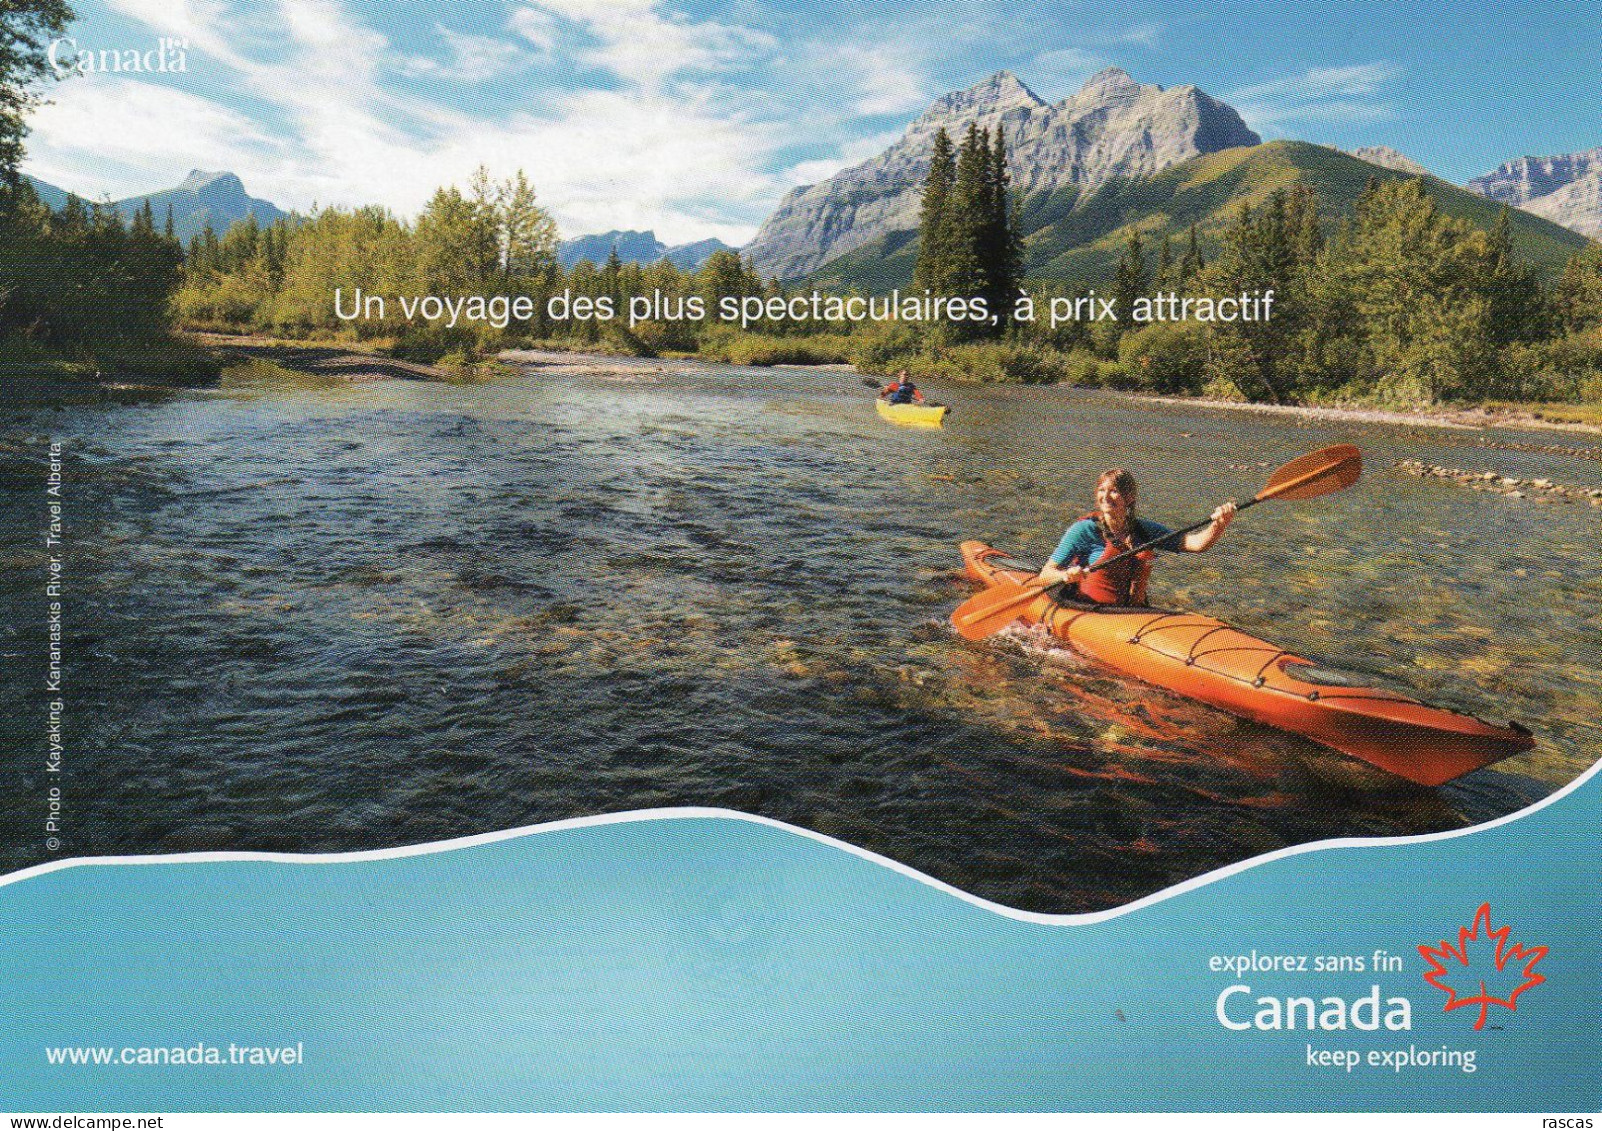 CPM - CANADA - BALADE DANS LES ROCHEUSES CANADIENNES - CANOE - Modern Cards